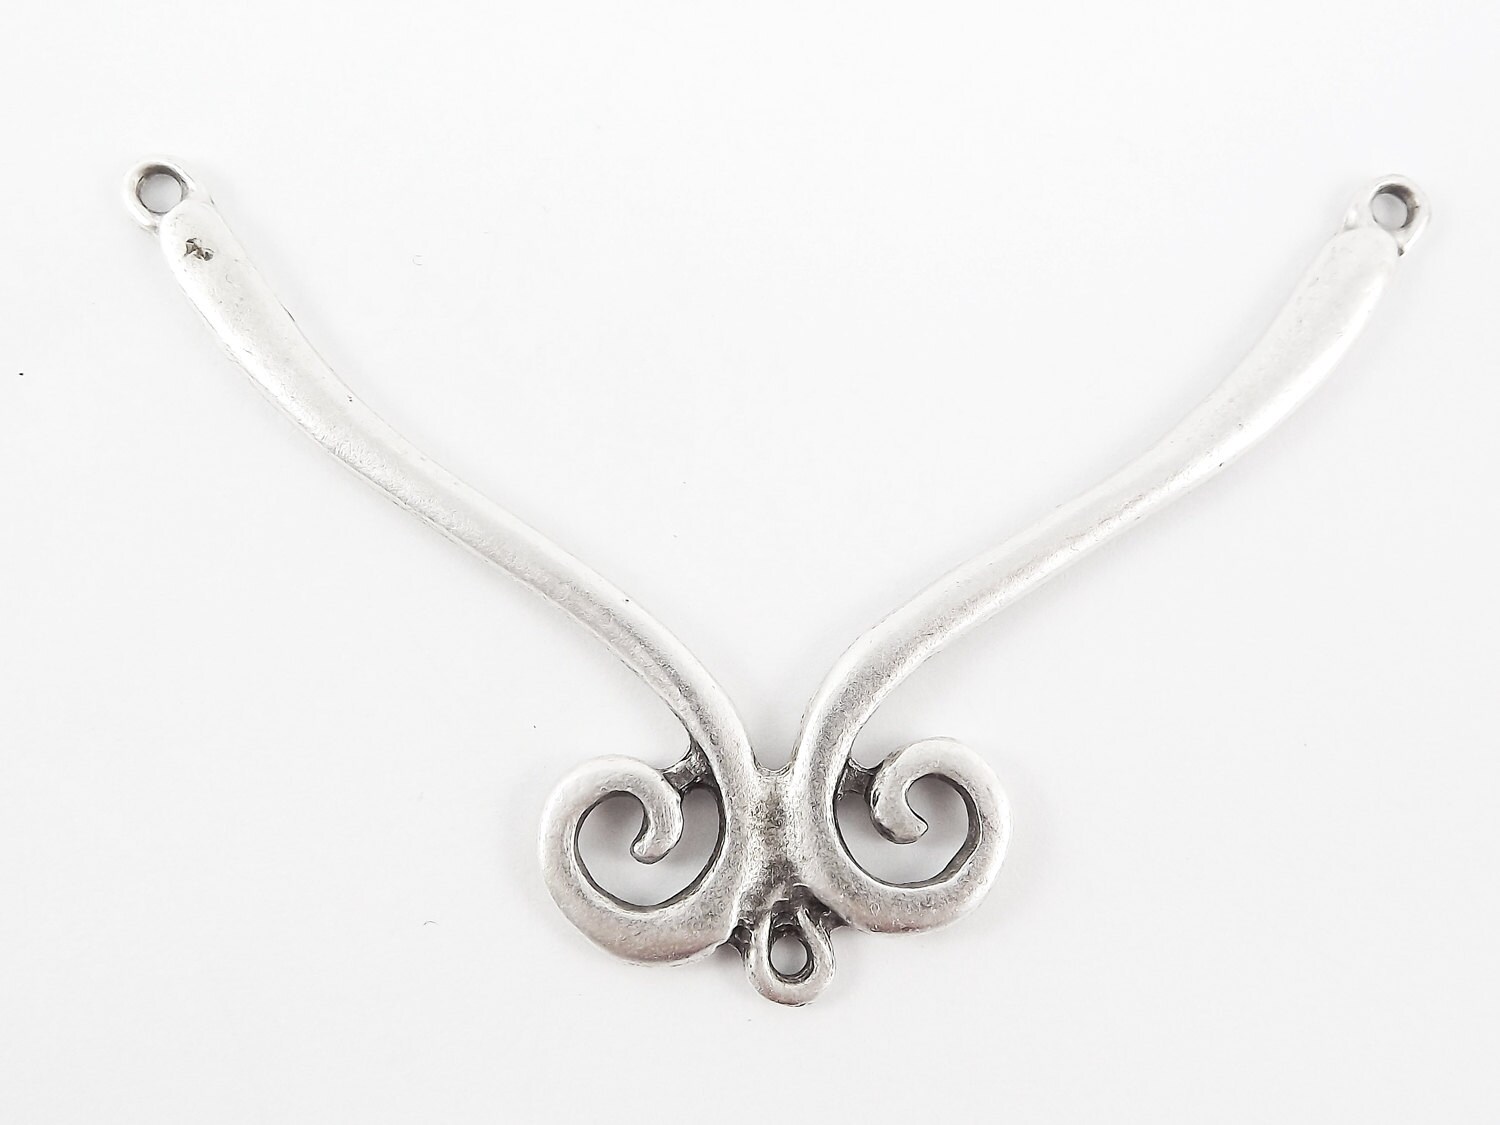 Medium Necklace Focal Collar Bar Pendant Connector With Loops - Matte  Antique Silver Plated - 1PC